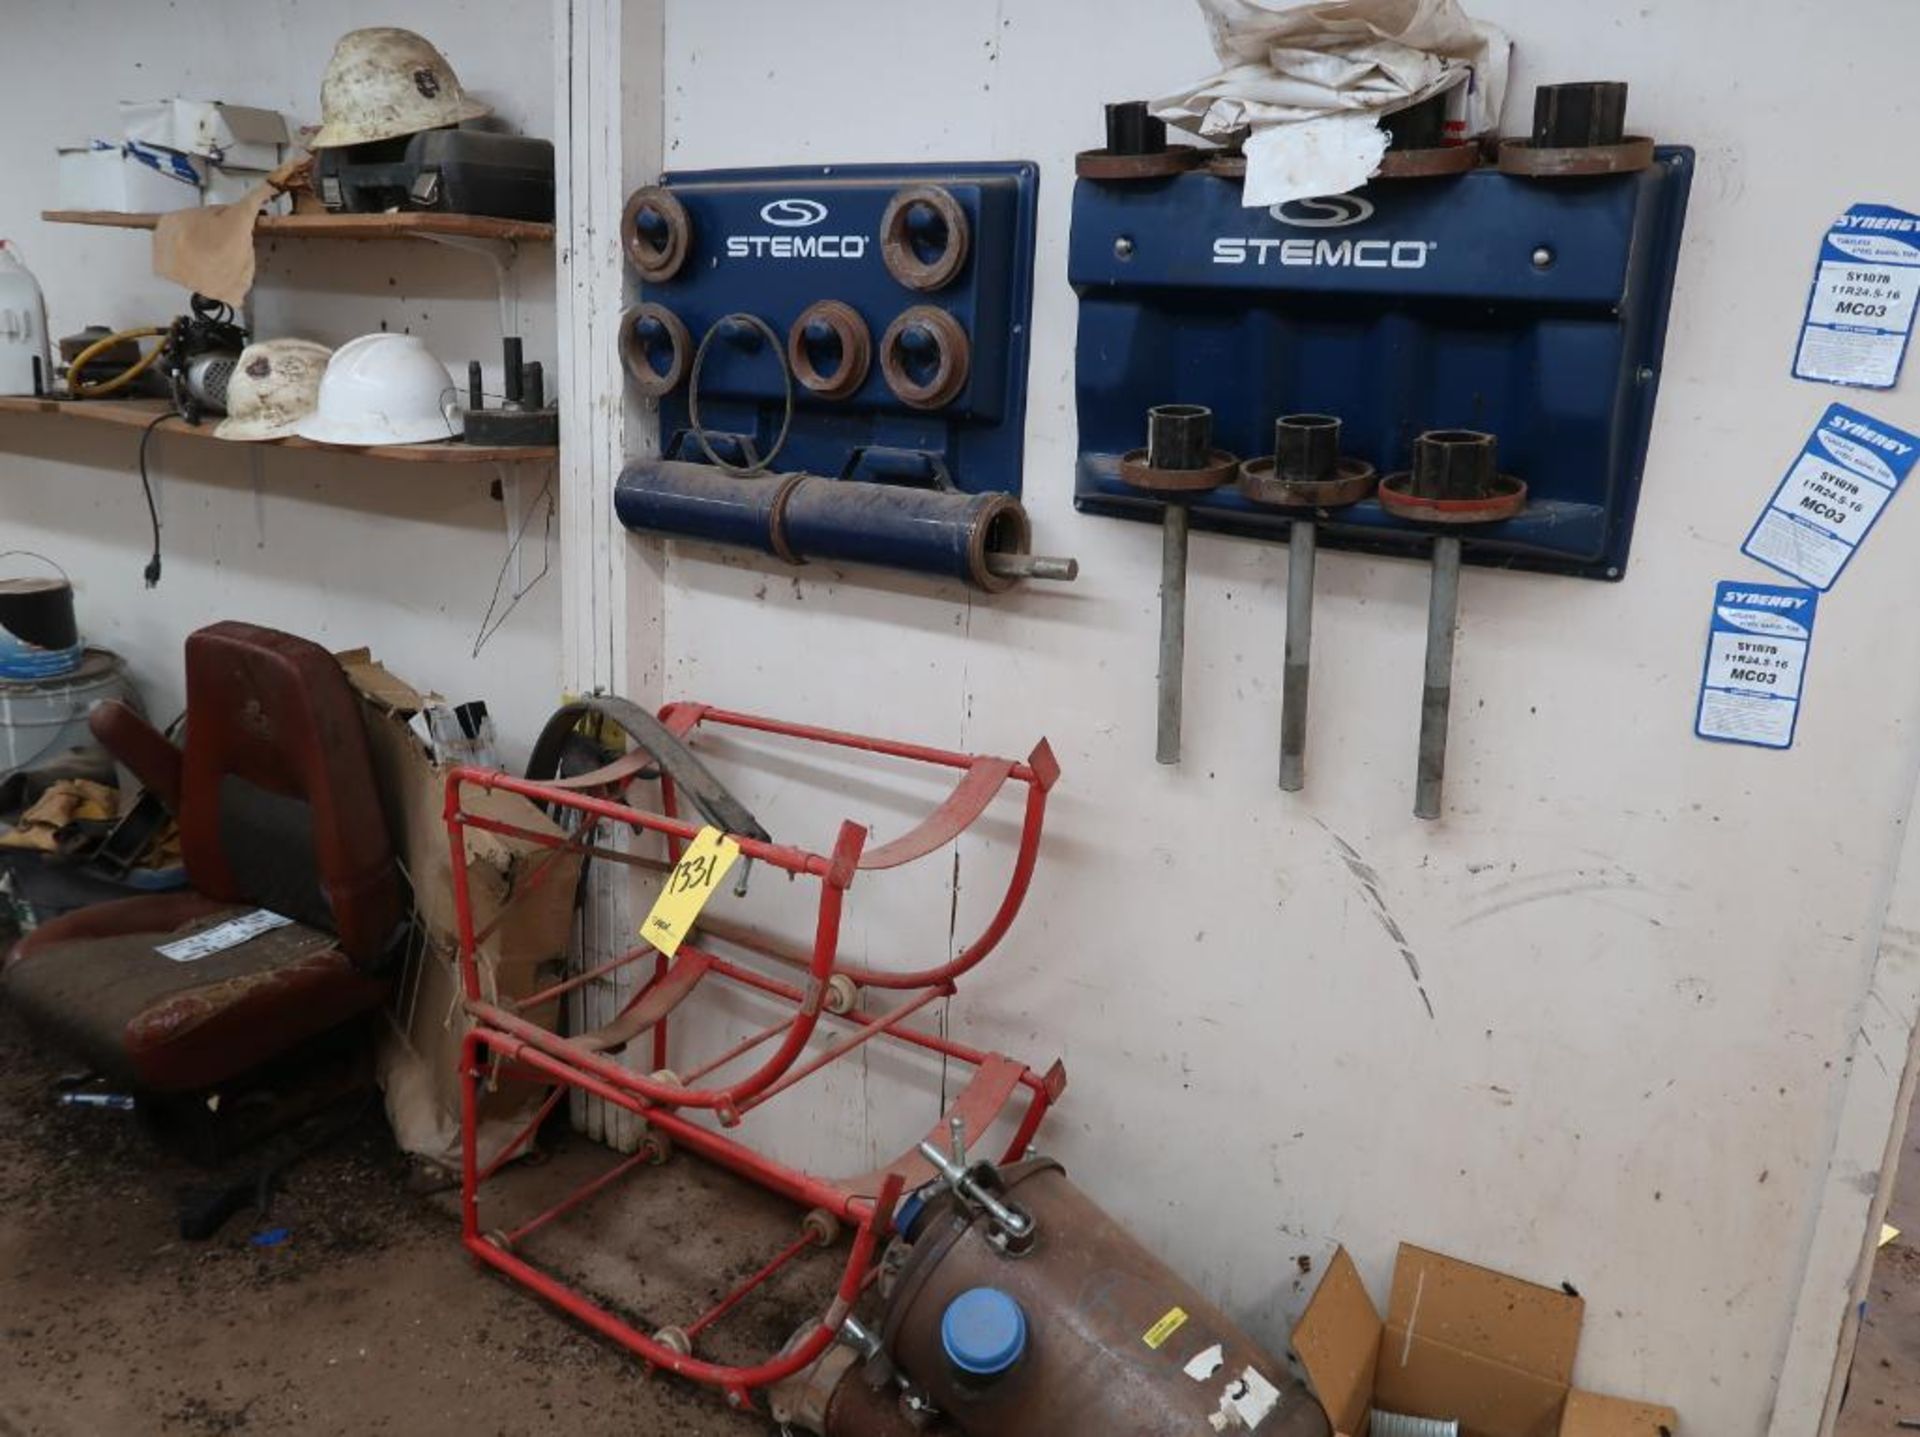 LOT: Balance of Garage Contents including Tools, Work Benches, Vise, Truck Parts, Pallet Rack, - Image 10 of 10